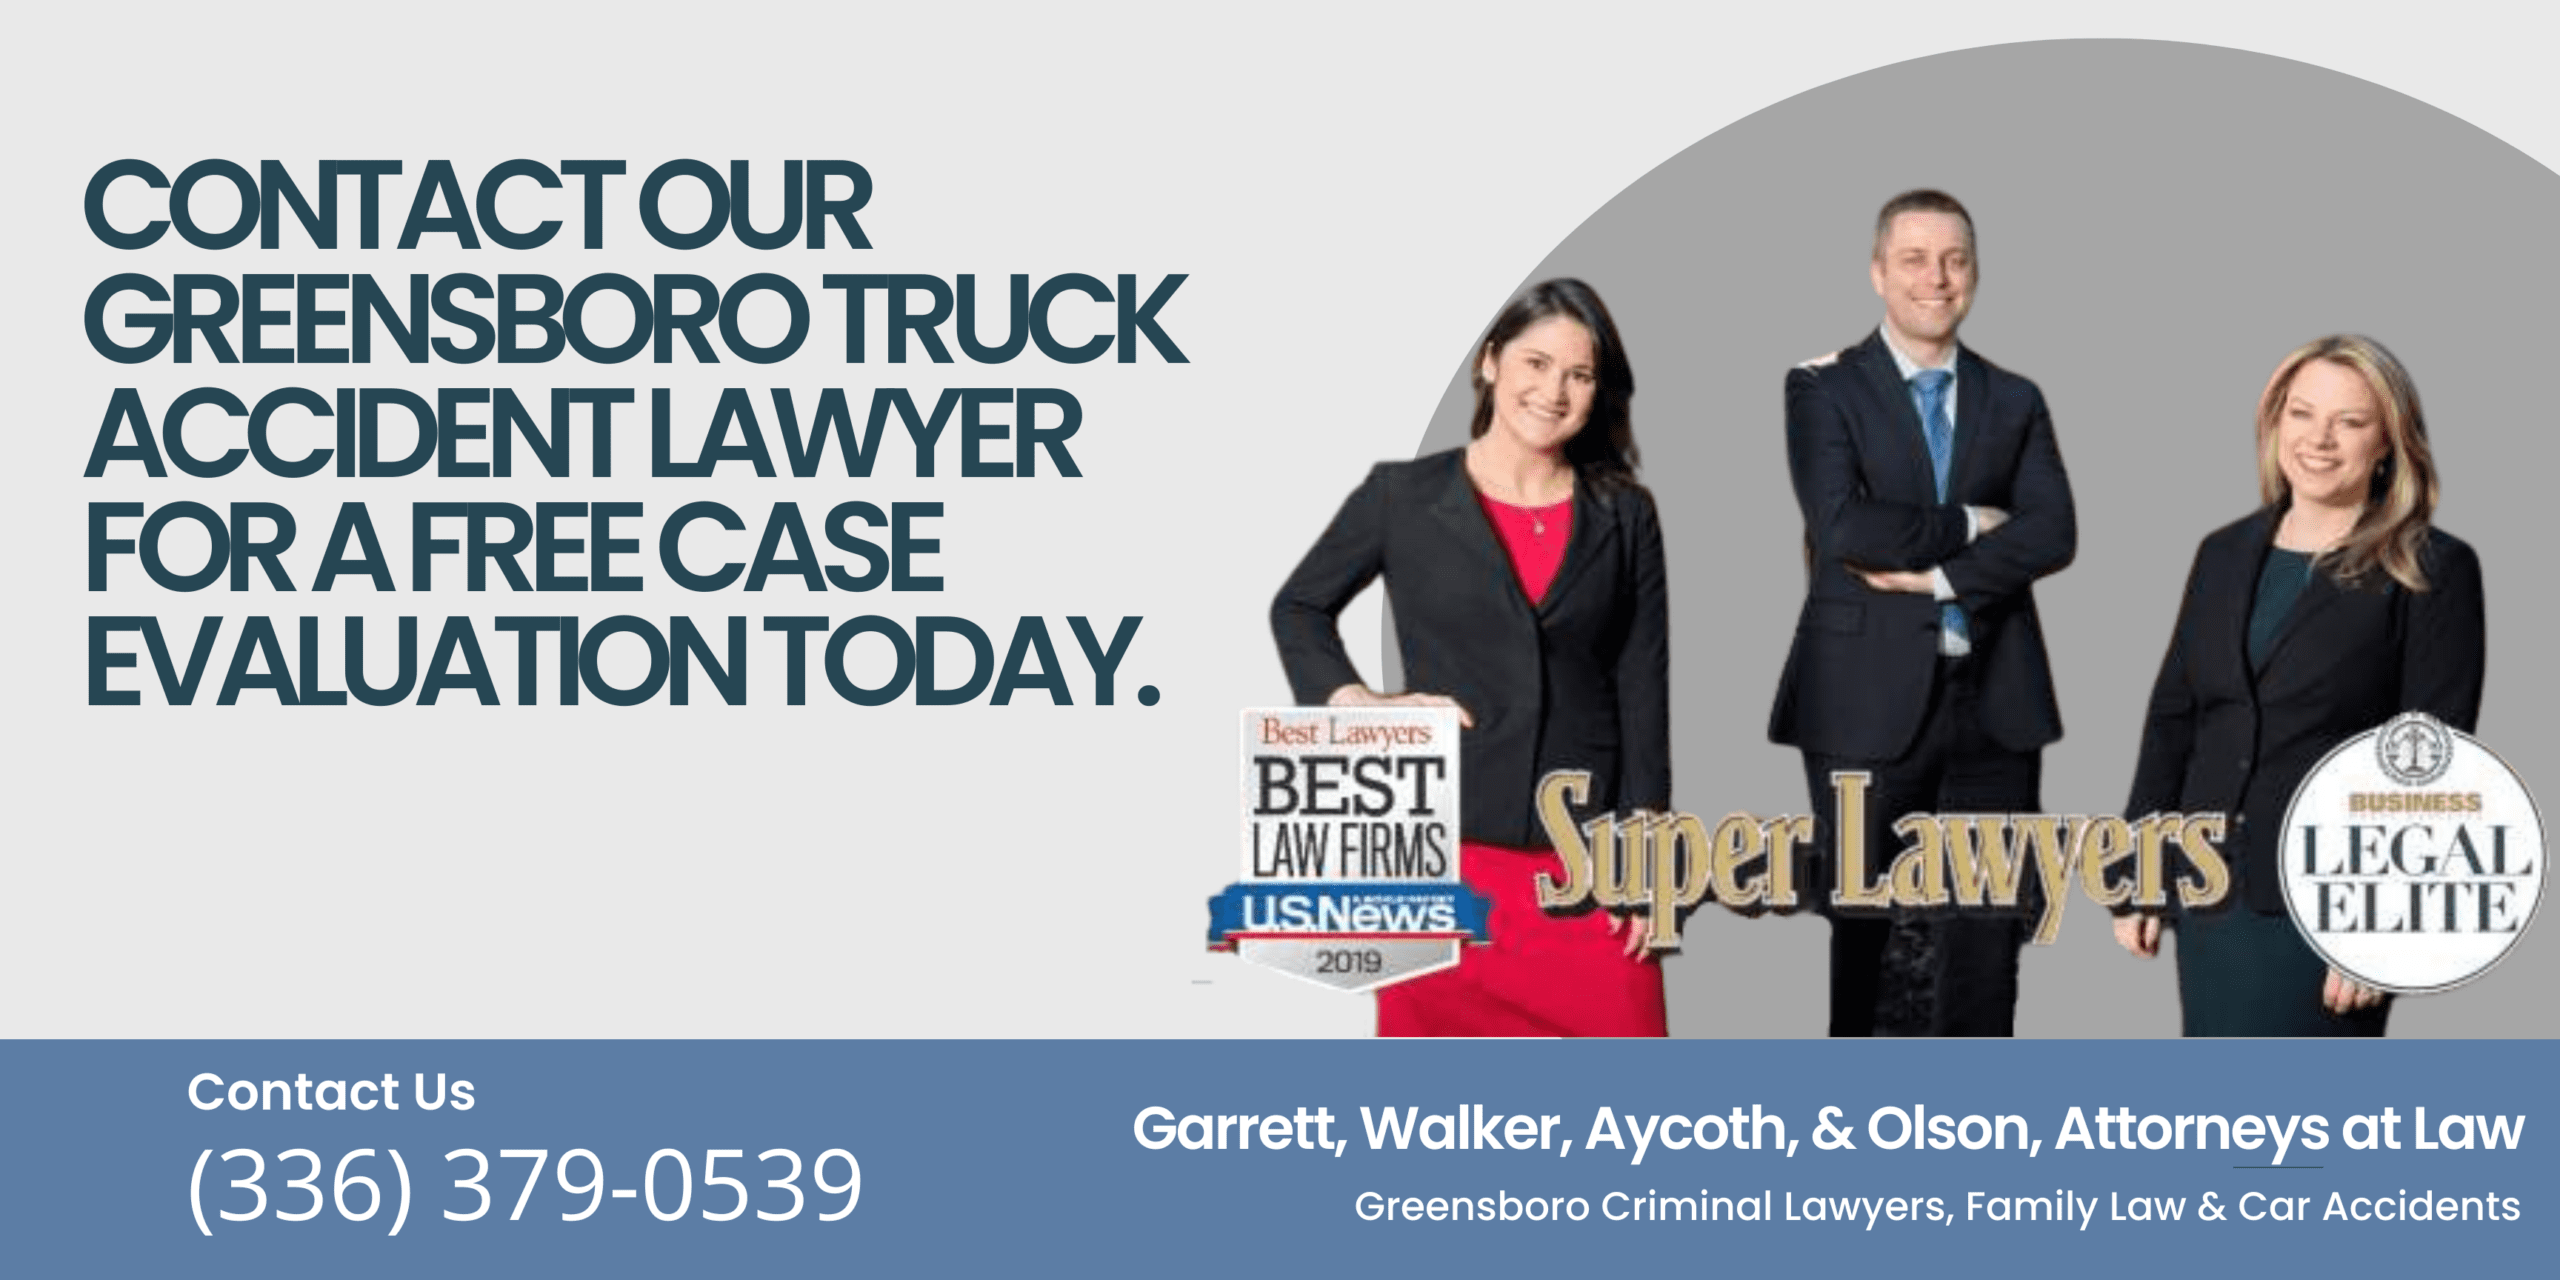 Contact our Greensboro Truck Accident Lawyer